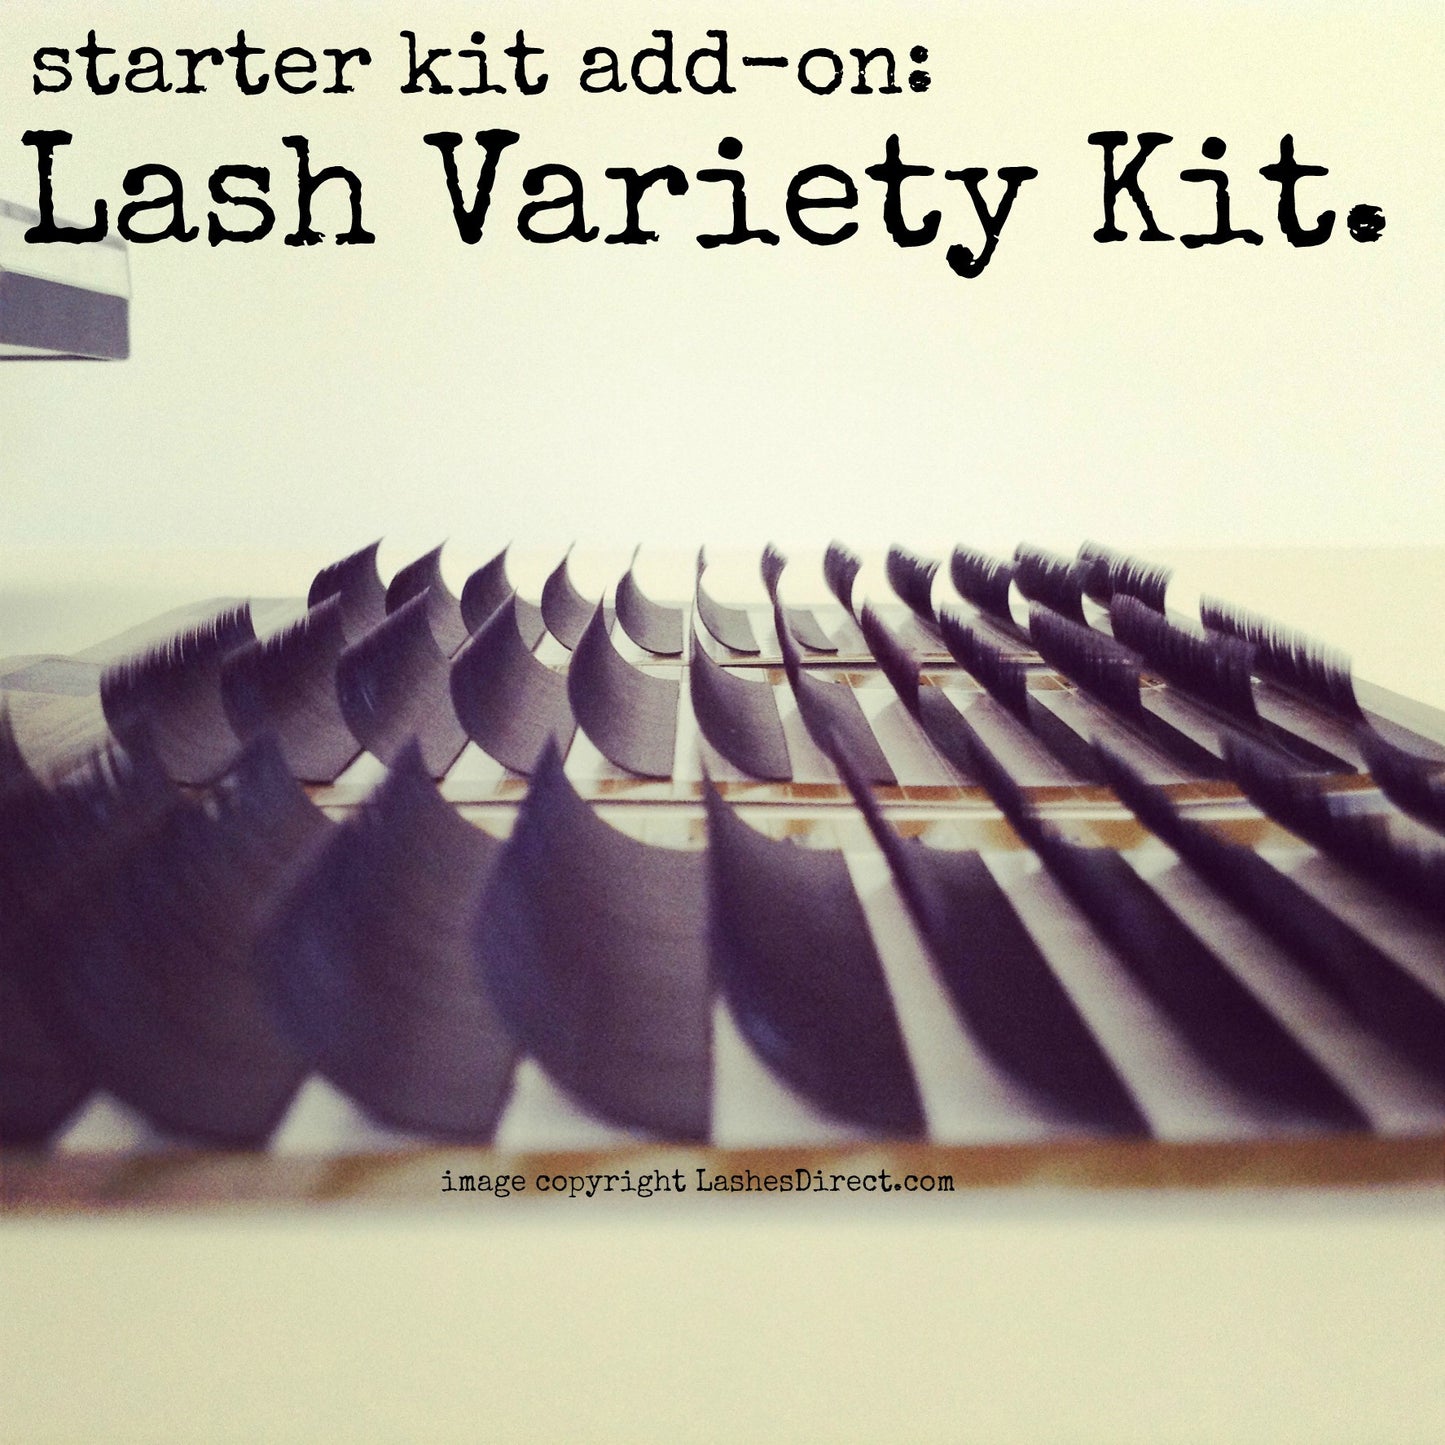 Eyelash Extension Starter Kit: Add on Lash Variety Kit.  Includes additional Lash trays that are not available in Starter Kit